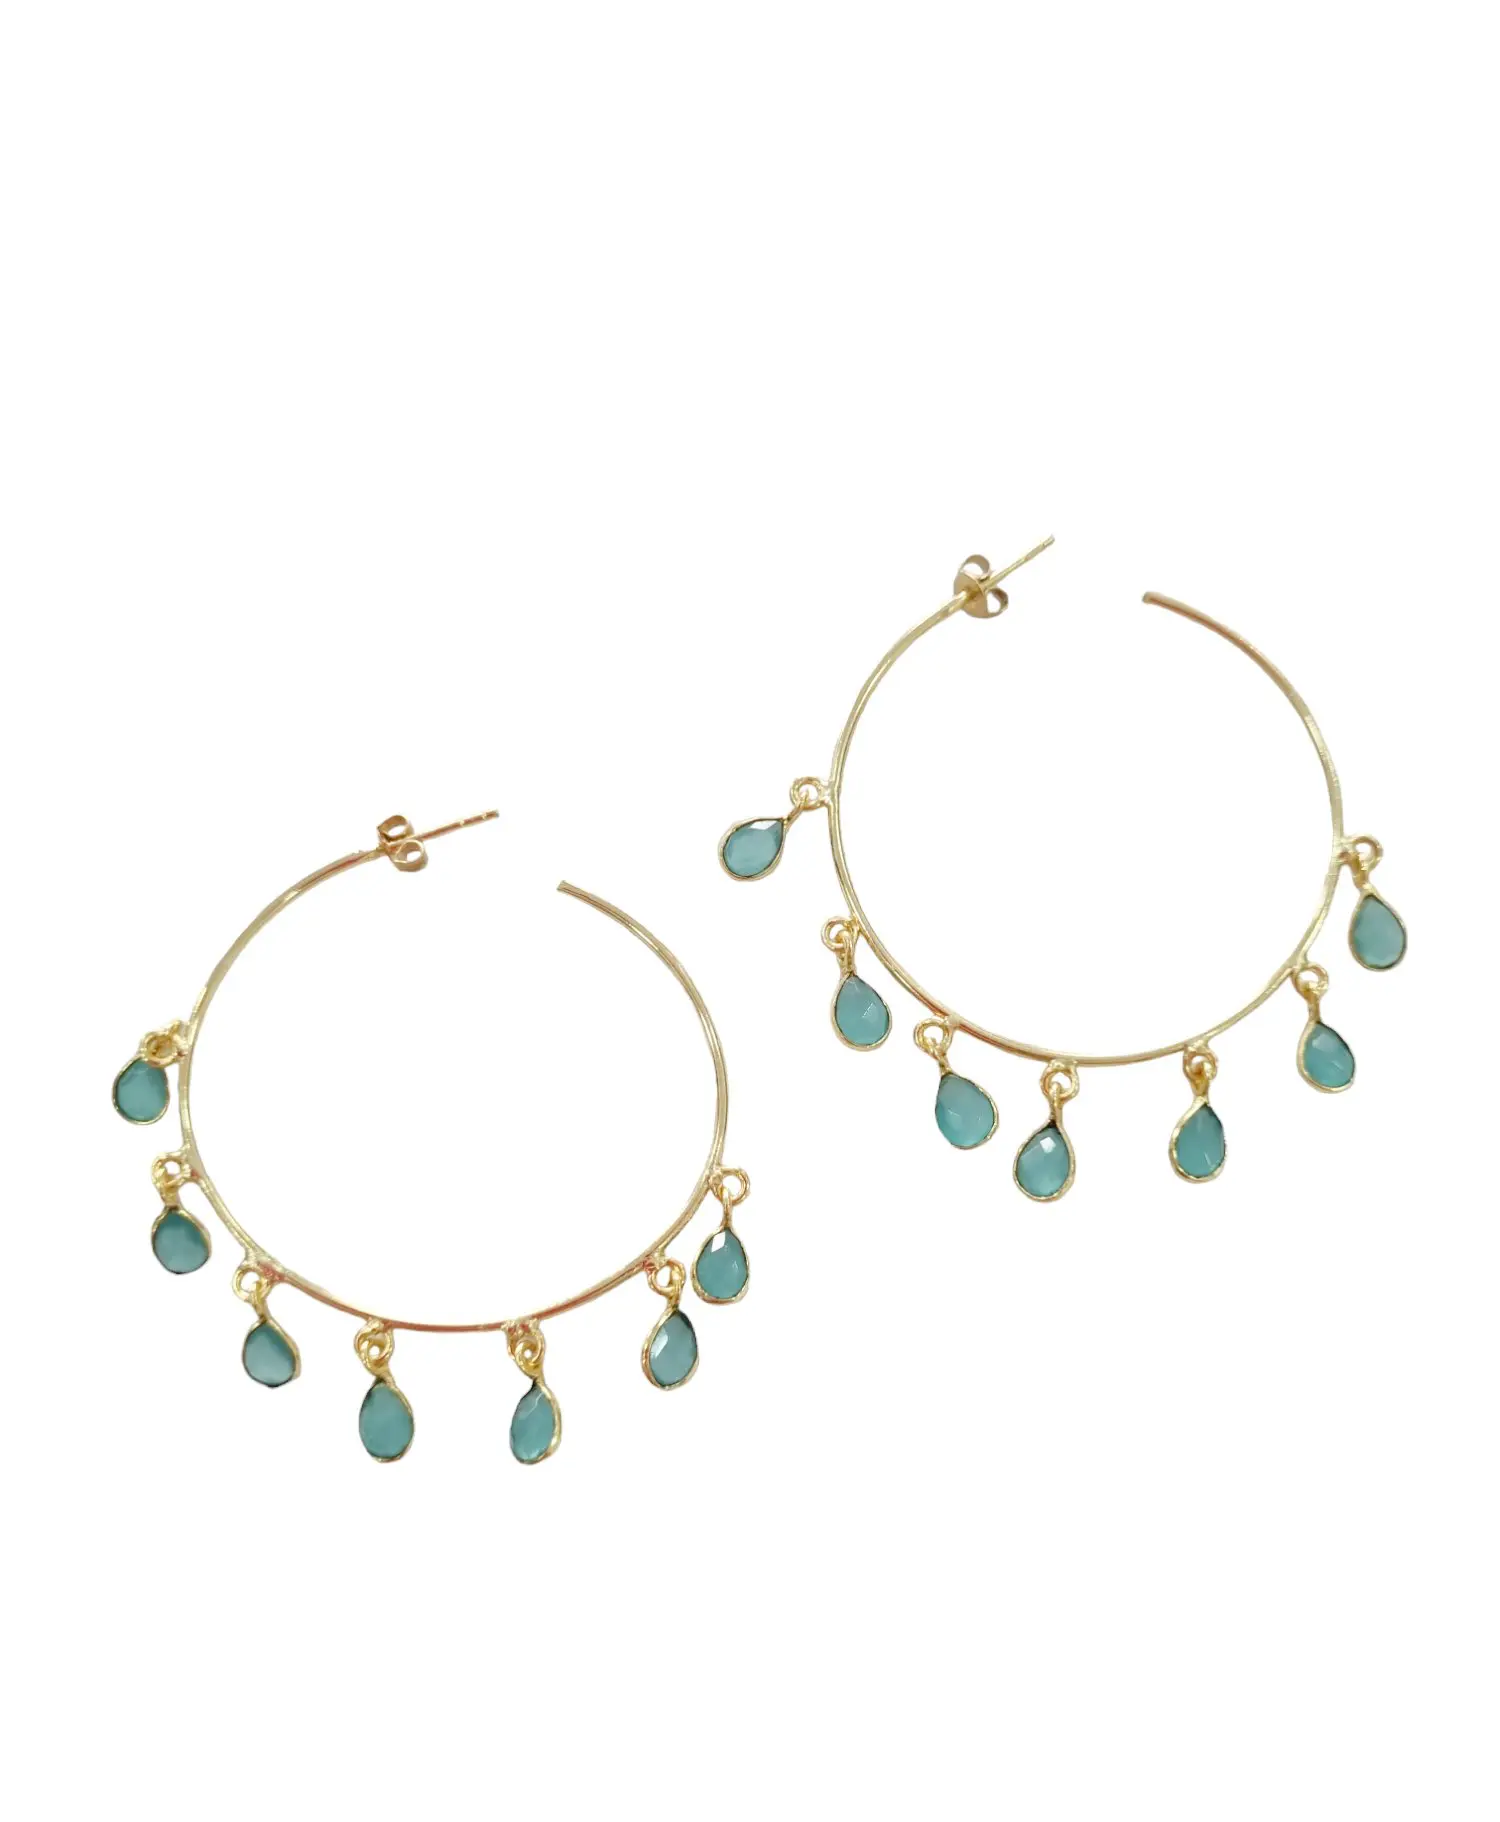 Circle earrings made of brass with hanging quartz drops in aquamarine colour.Circumference of circles 5cmWeight 3.1gr